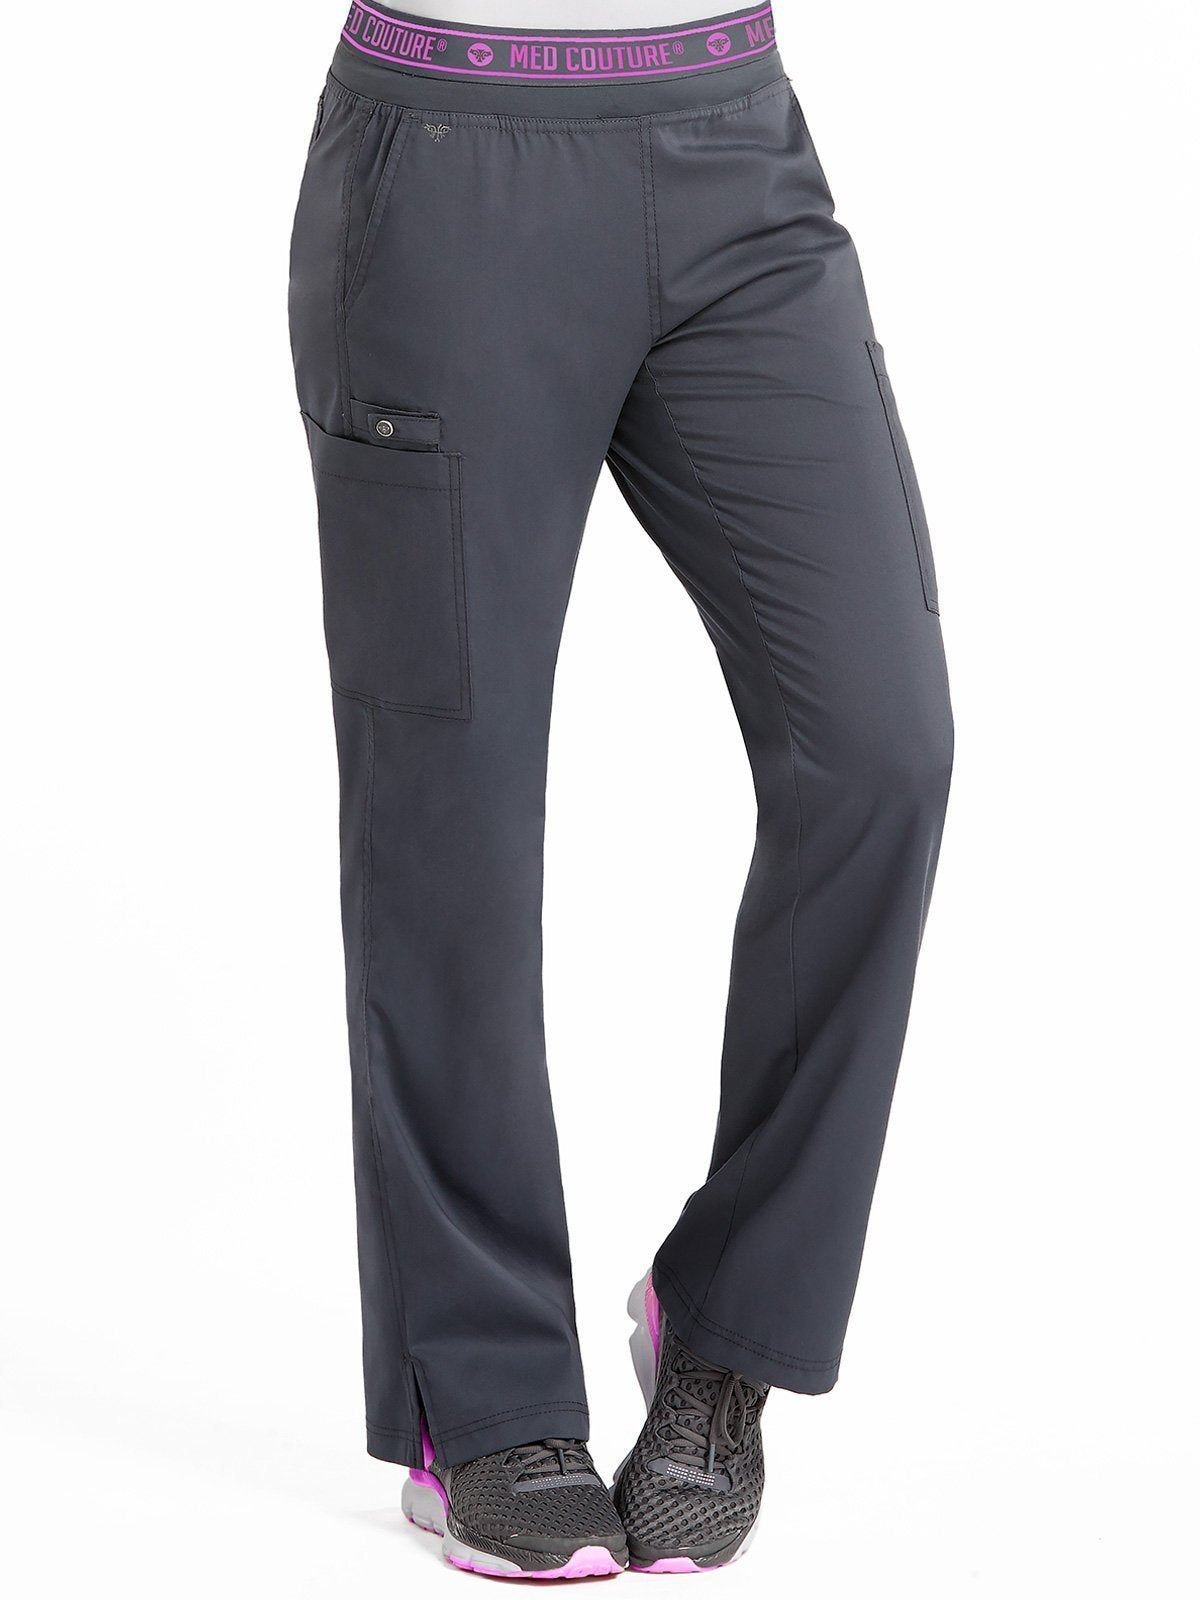 Med Couture 7739 YOGA 2 CARGO POCKET PANT (Size: XS/T-XL/T)